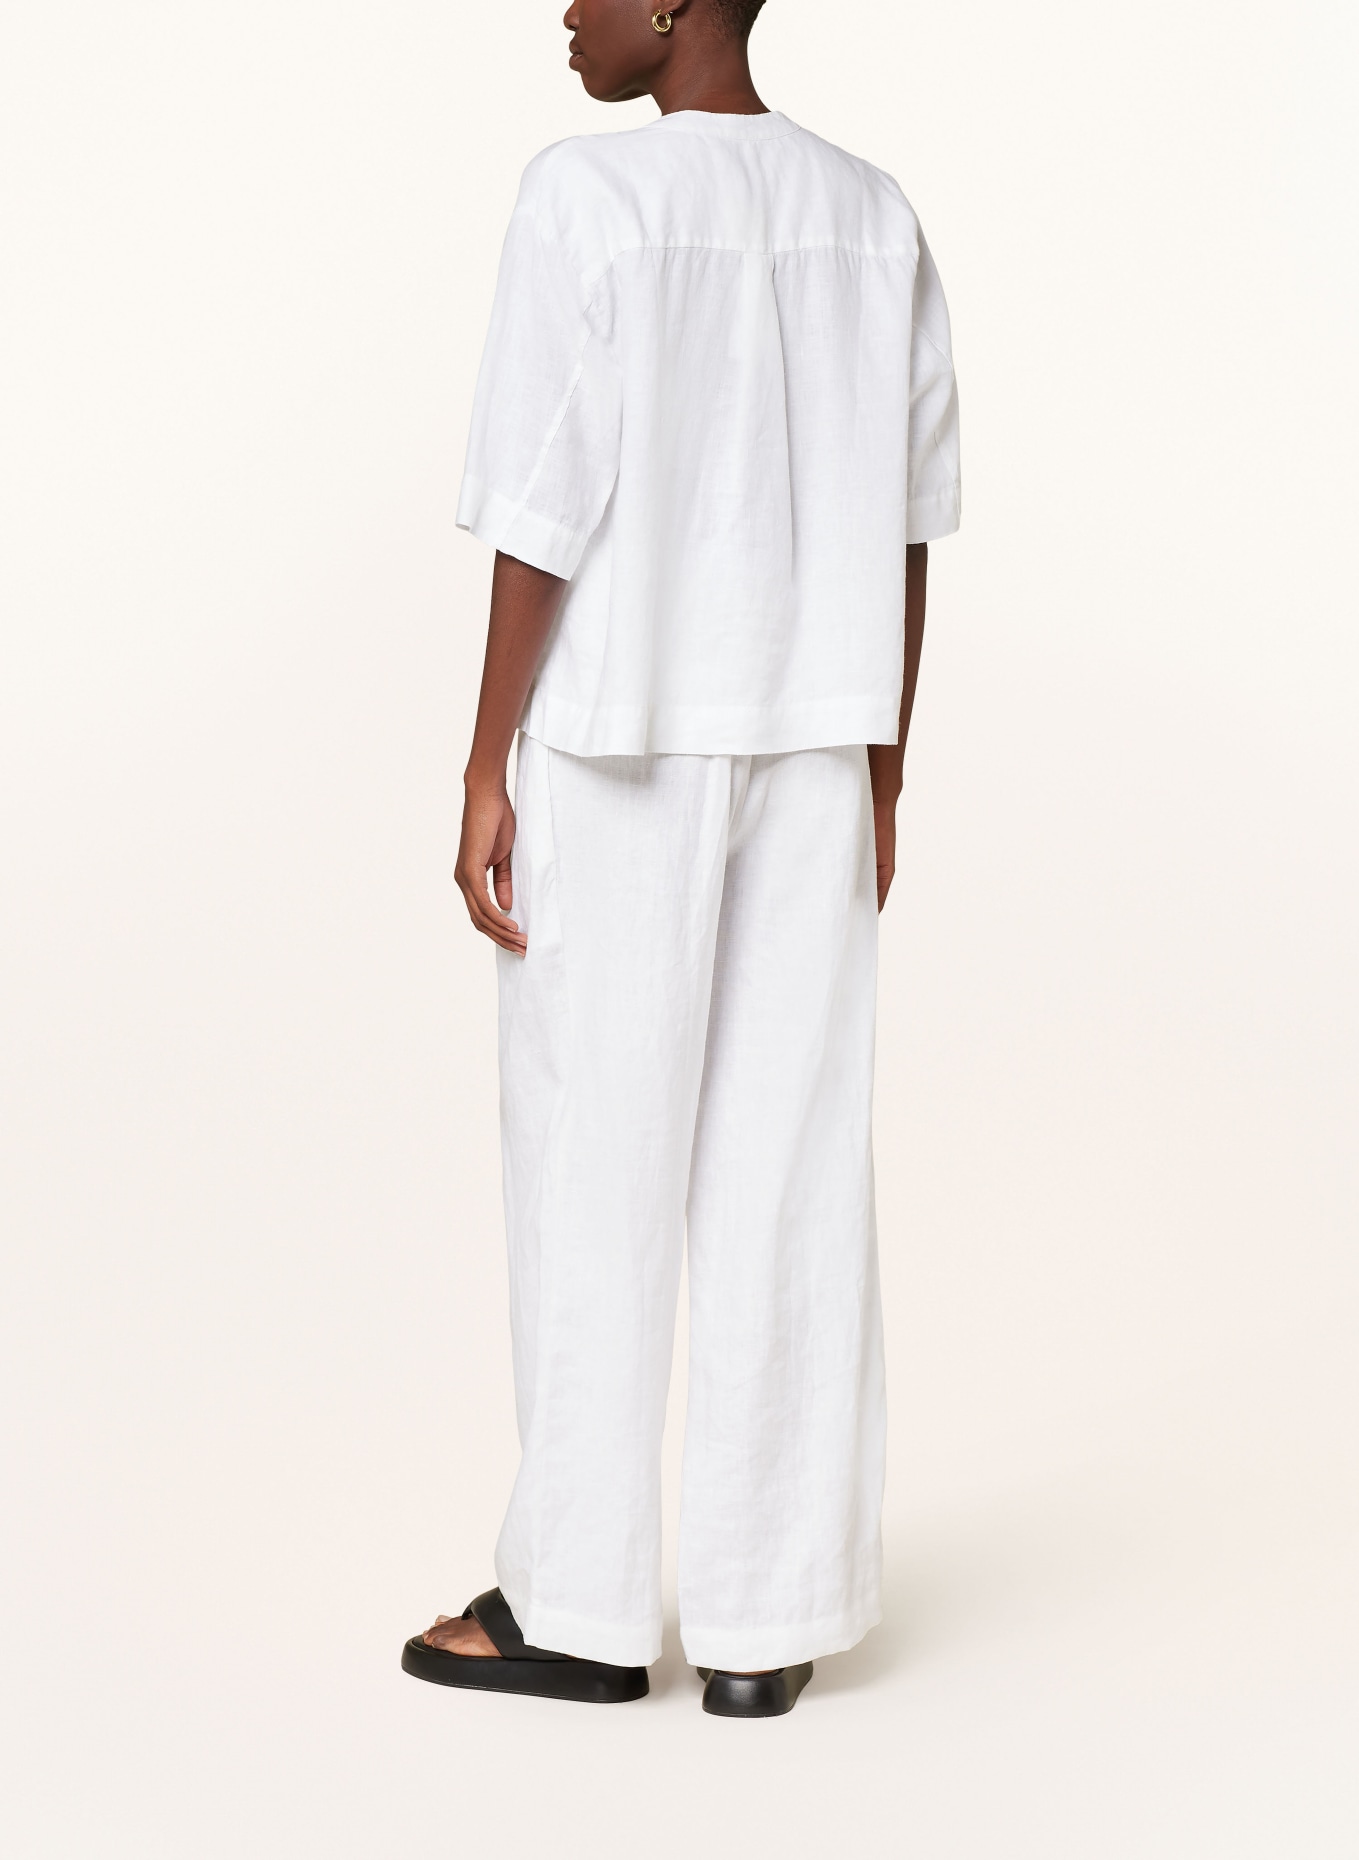 TONNO & PANNA Linen blouse with 3/4 sleeves, Color: WHITE (Image 3)